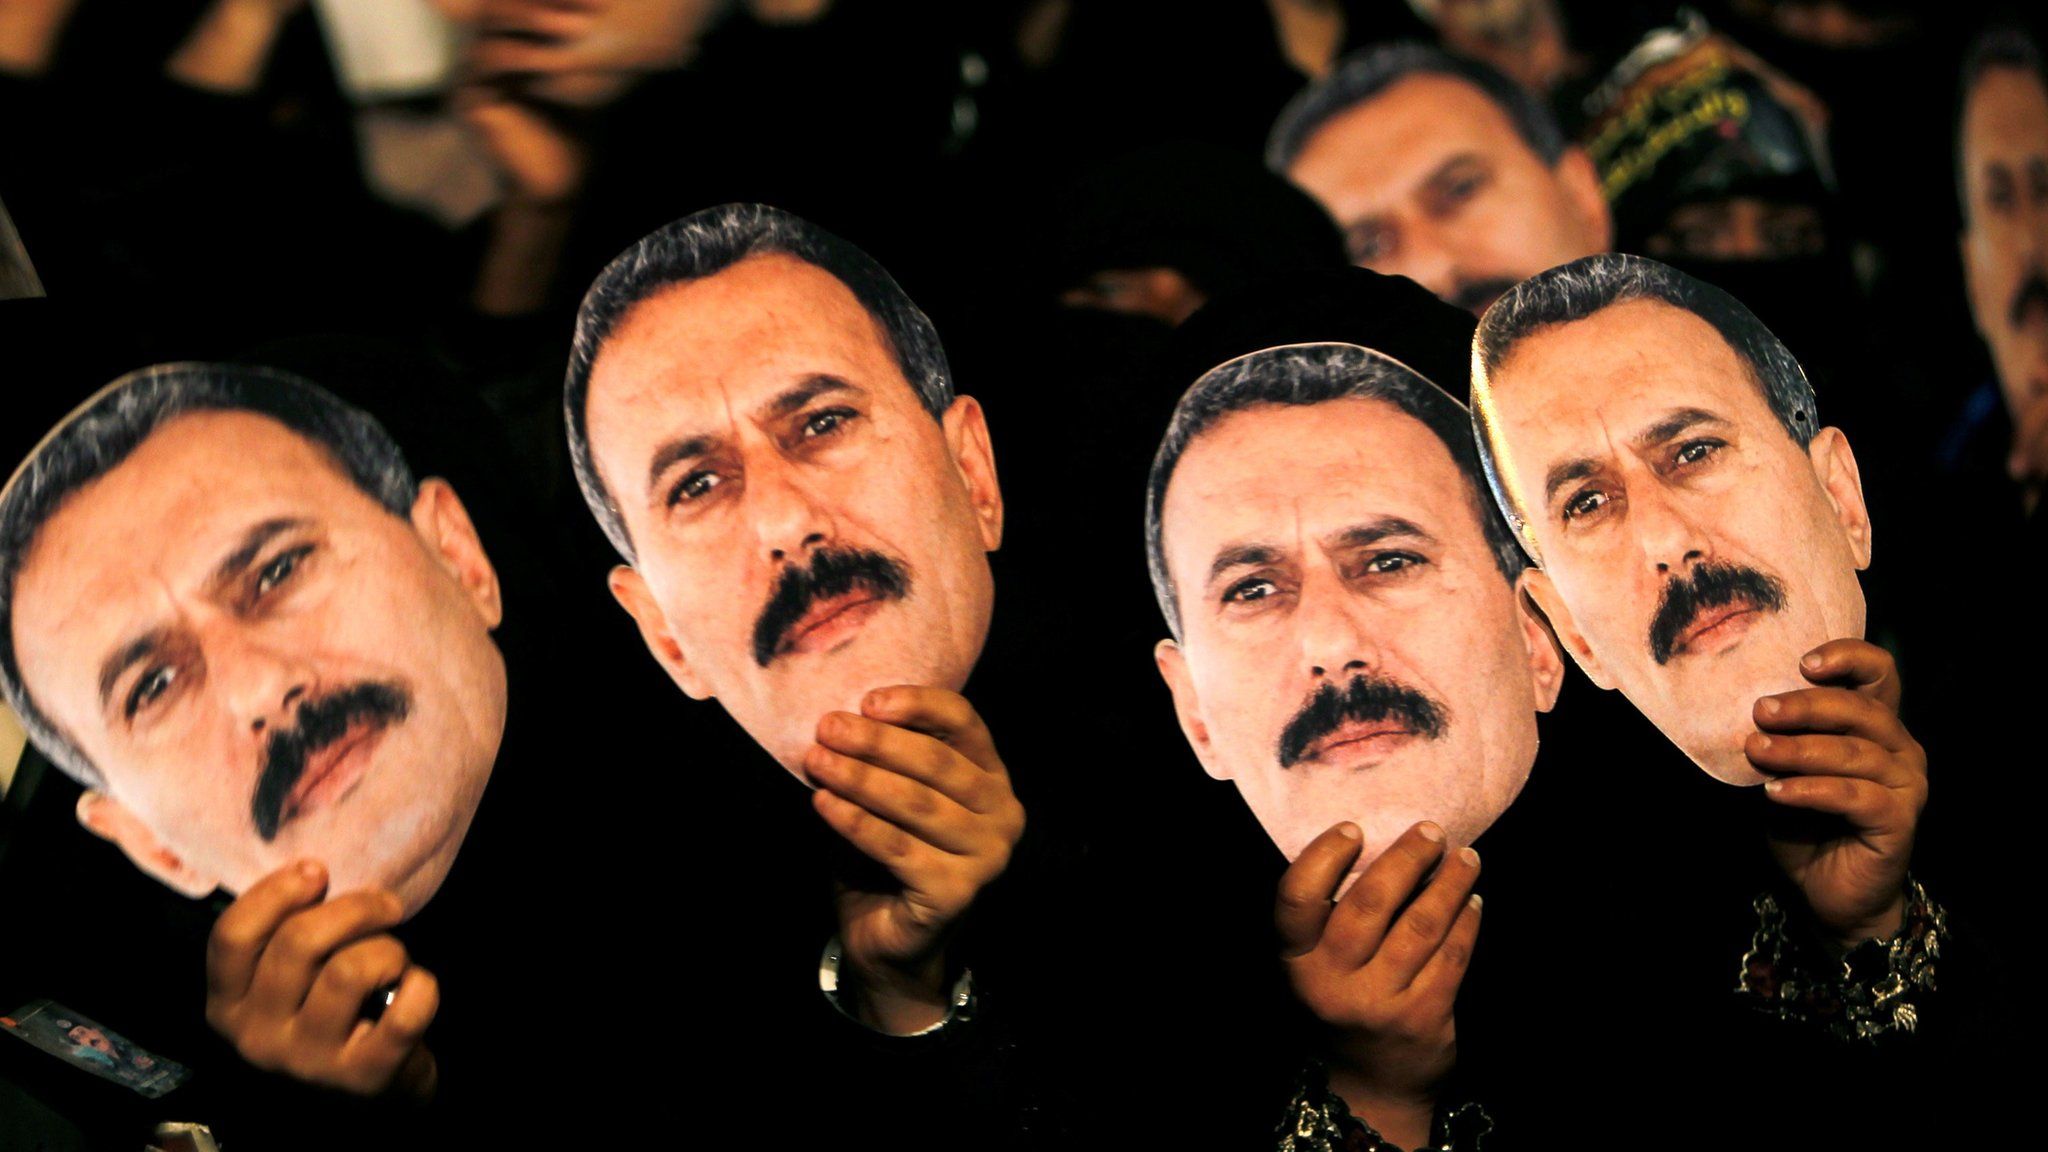 Female supporters of Ali Abdullah Saleh hold up posters during a rally marking his 70th birthday anniversary in Sanaa (23 March 2012)